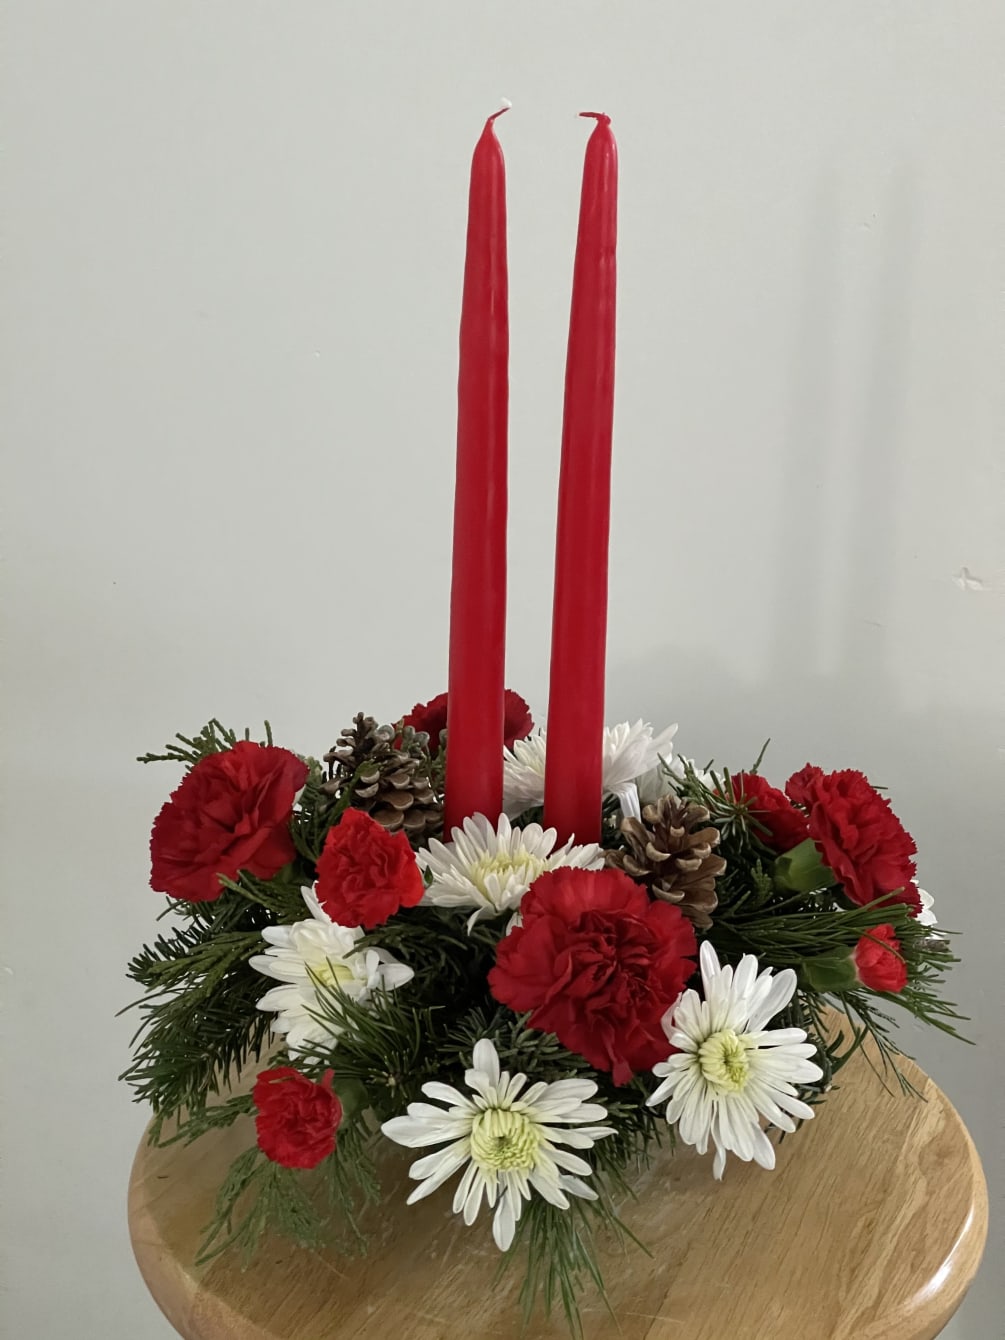 A beautiful traditional holiday classic centerpiece for your dinning table with red